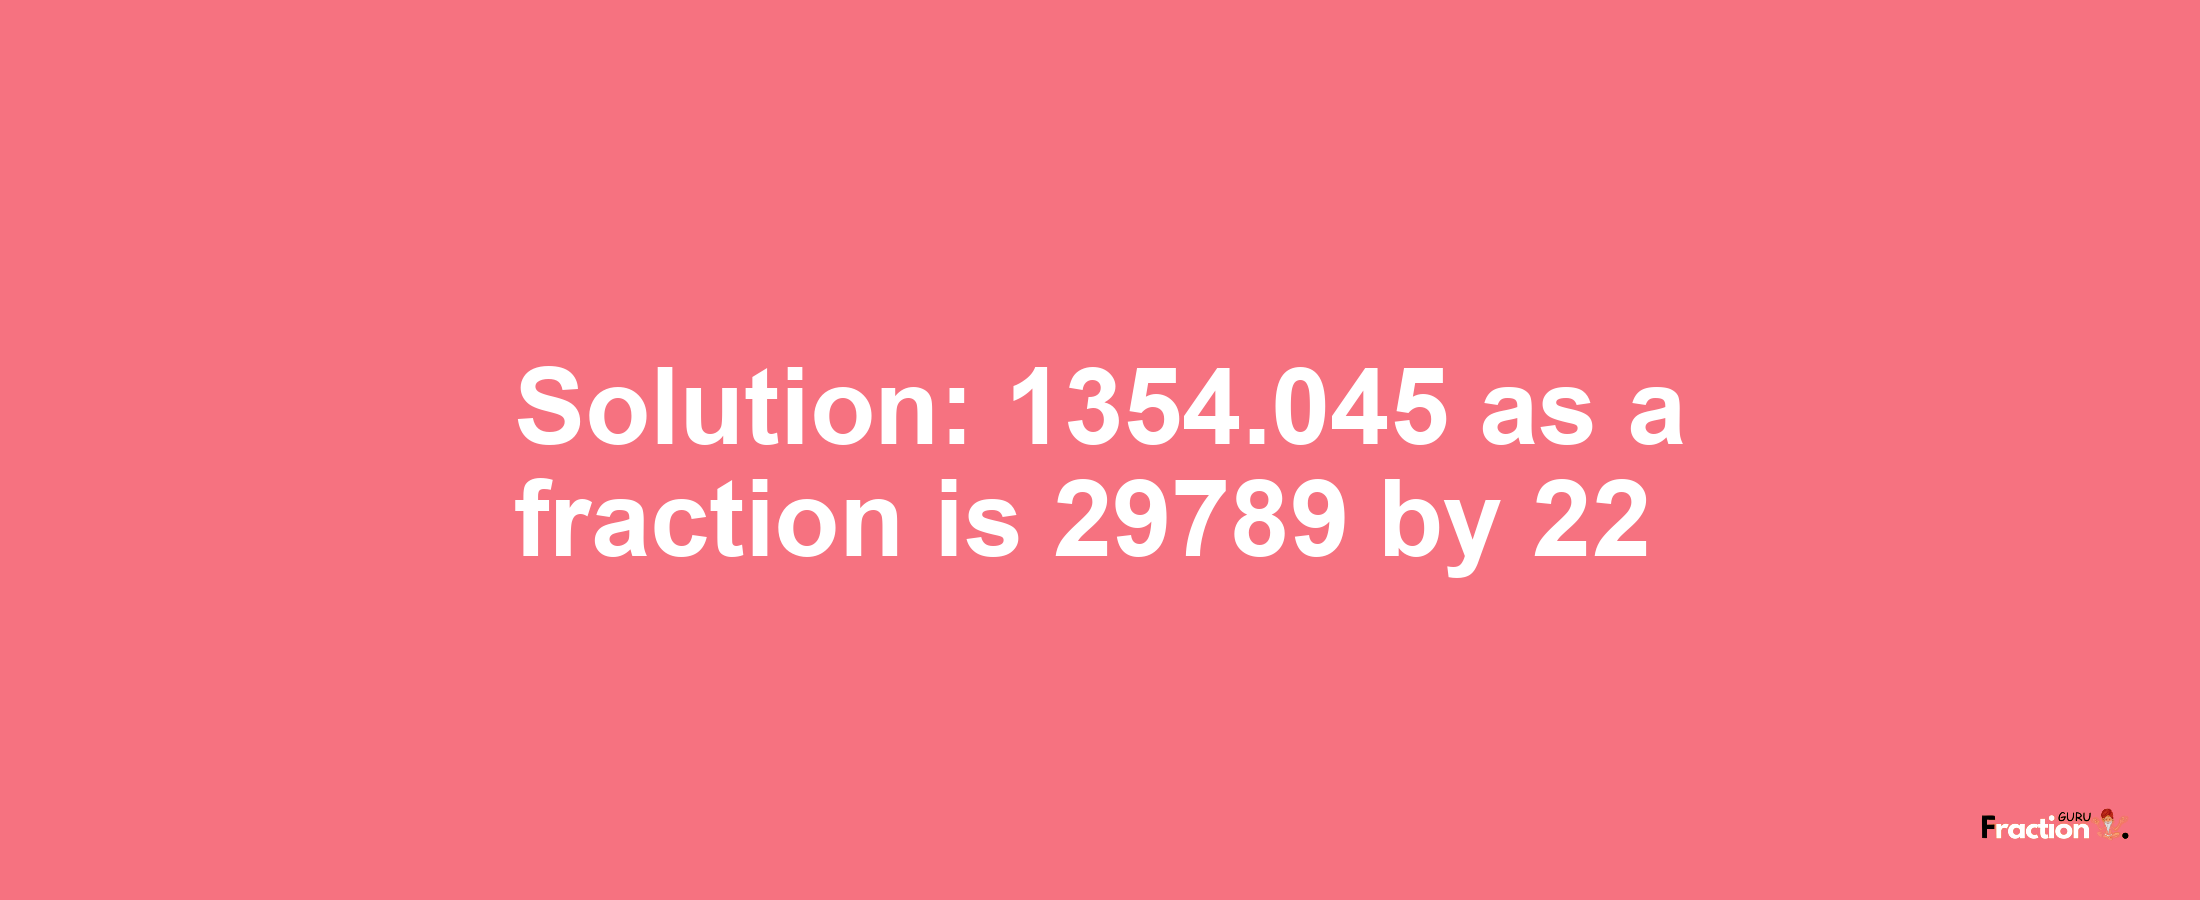 Solution:1354.045 as a fraction is 29789/22